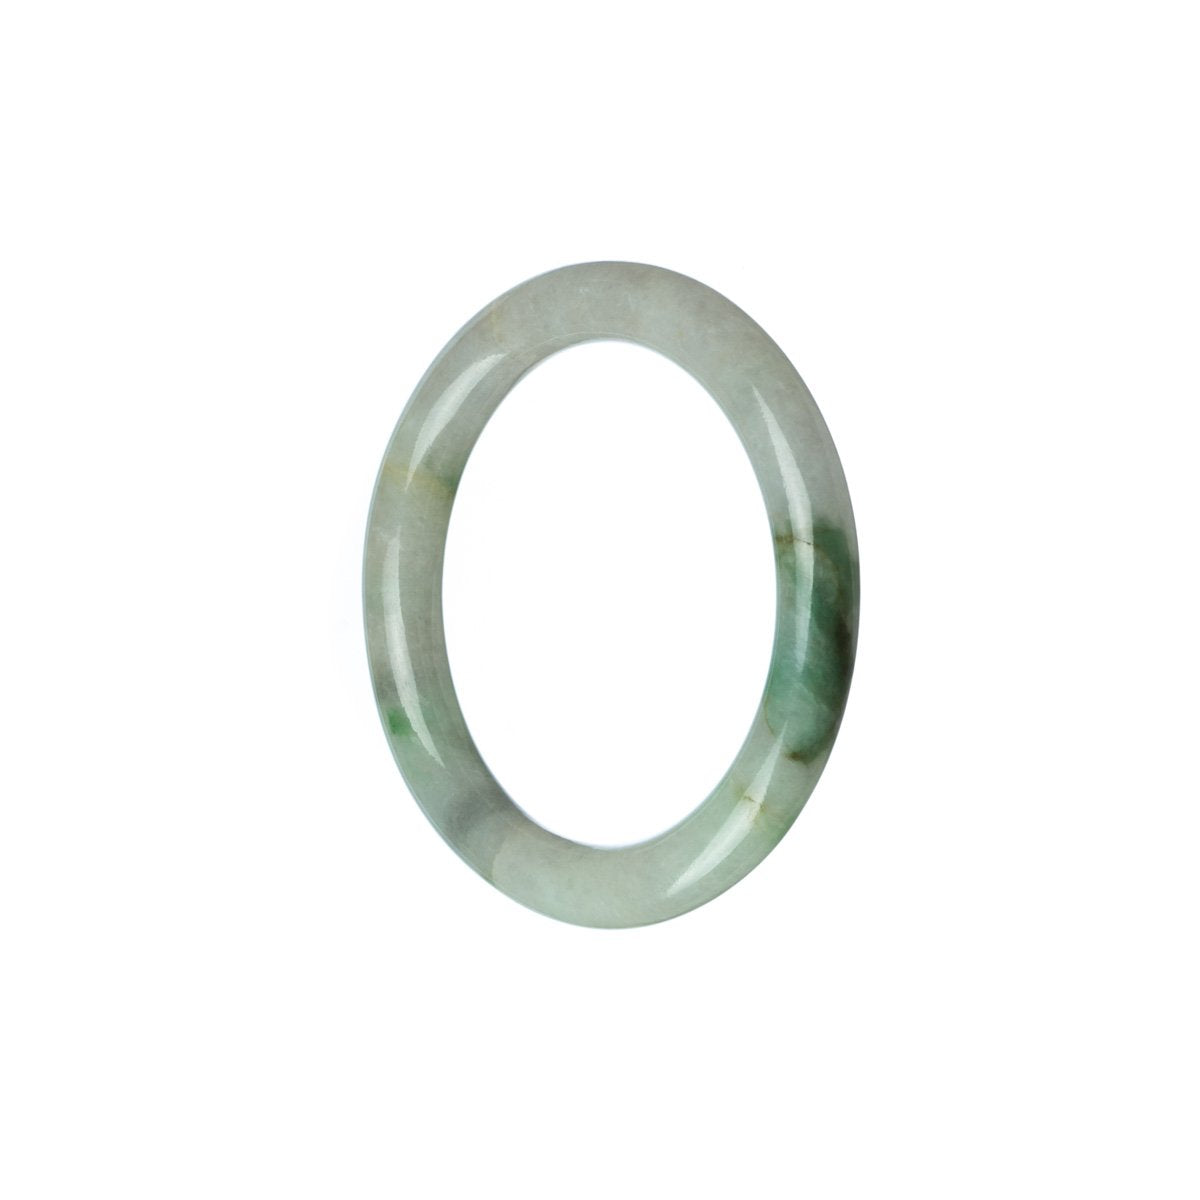 A round jade bangle bracelet in green and white, perfect for children, with a traditional and natural design.